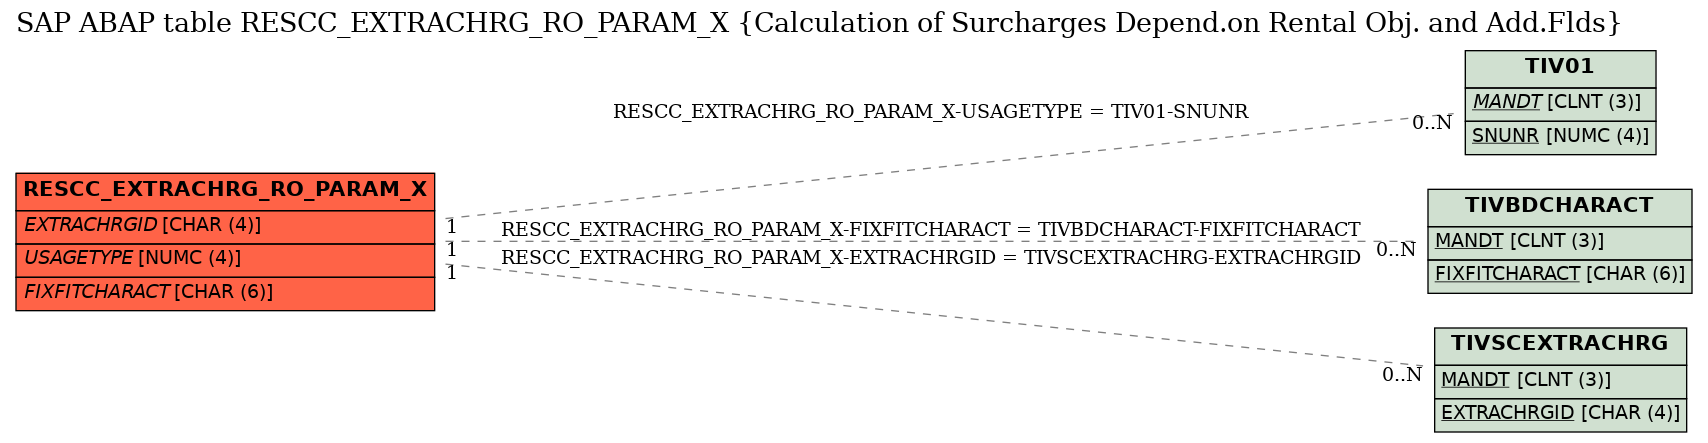 E-R Diagram for table RESCC_EXTRACHRG_RO_PARAM_X (Calculation of Surcharges Depend.on Rental Obj. and Add.Flds)